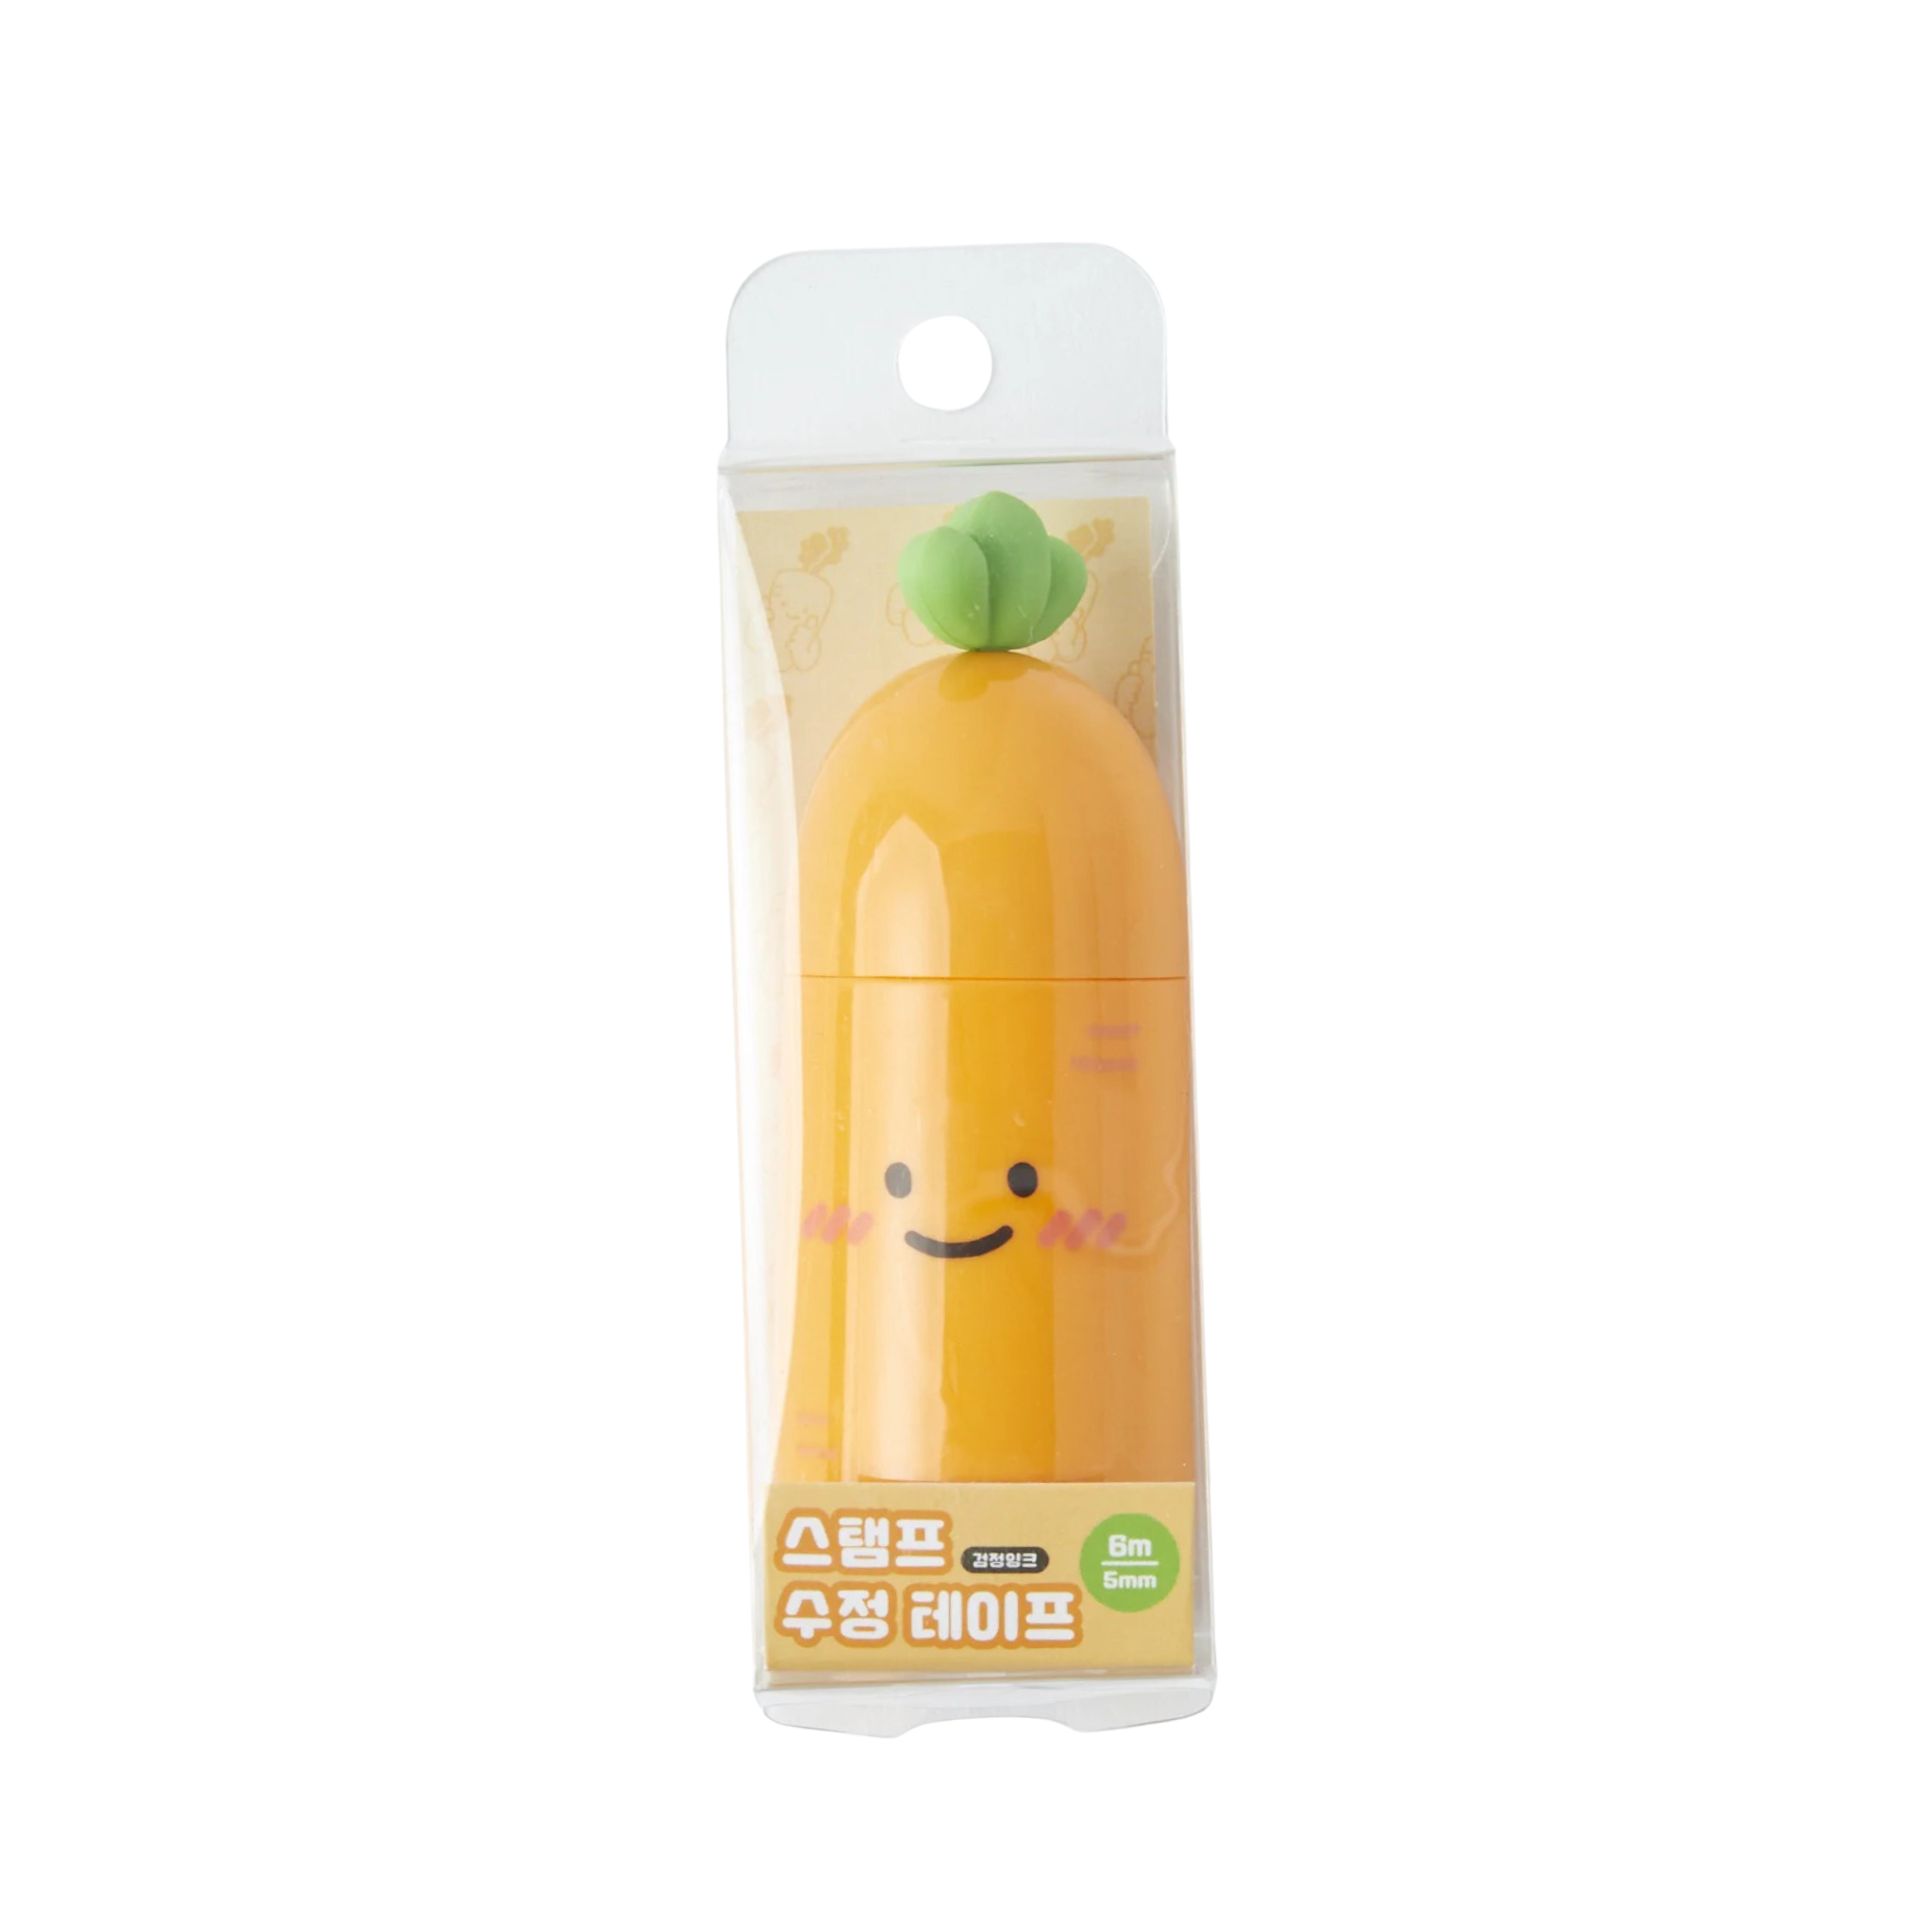 CORRECTIONTAPESTAMPCARROT.png